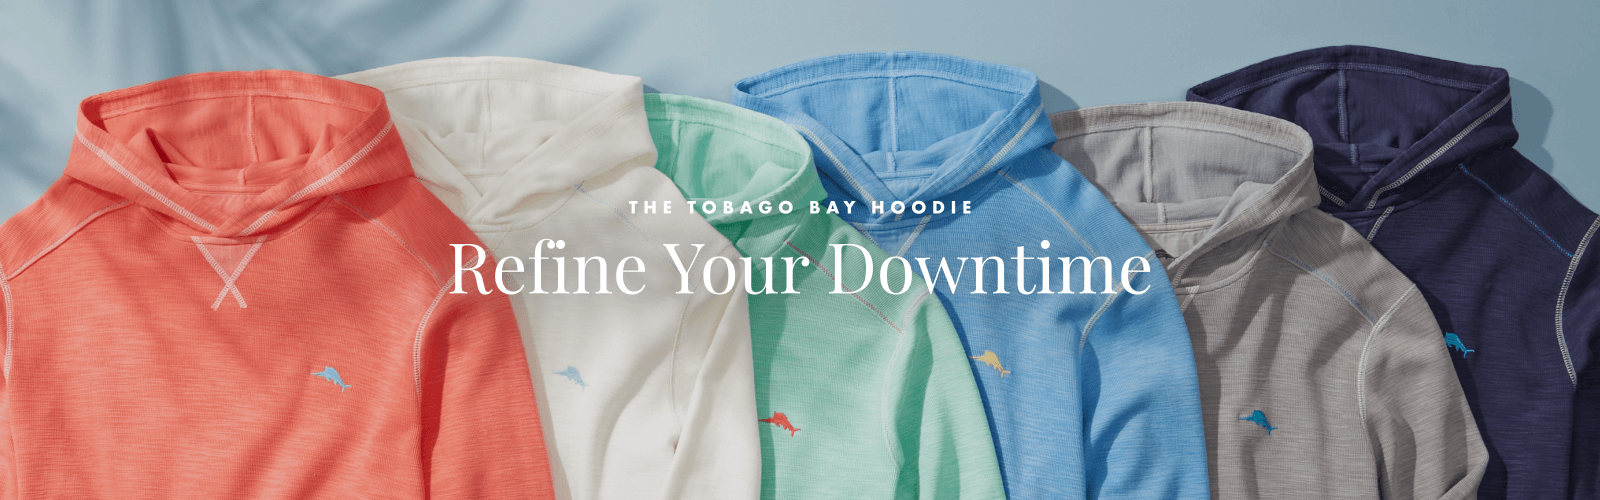 The Tobago Bay Hoodie: Refine Your Downtime